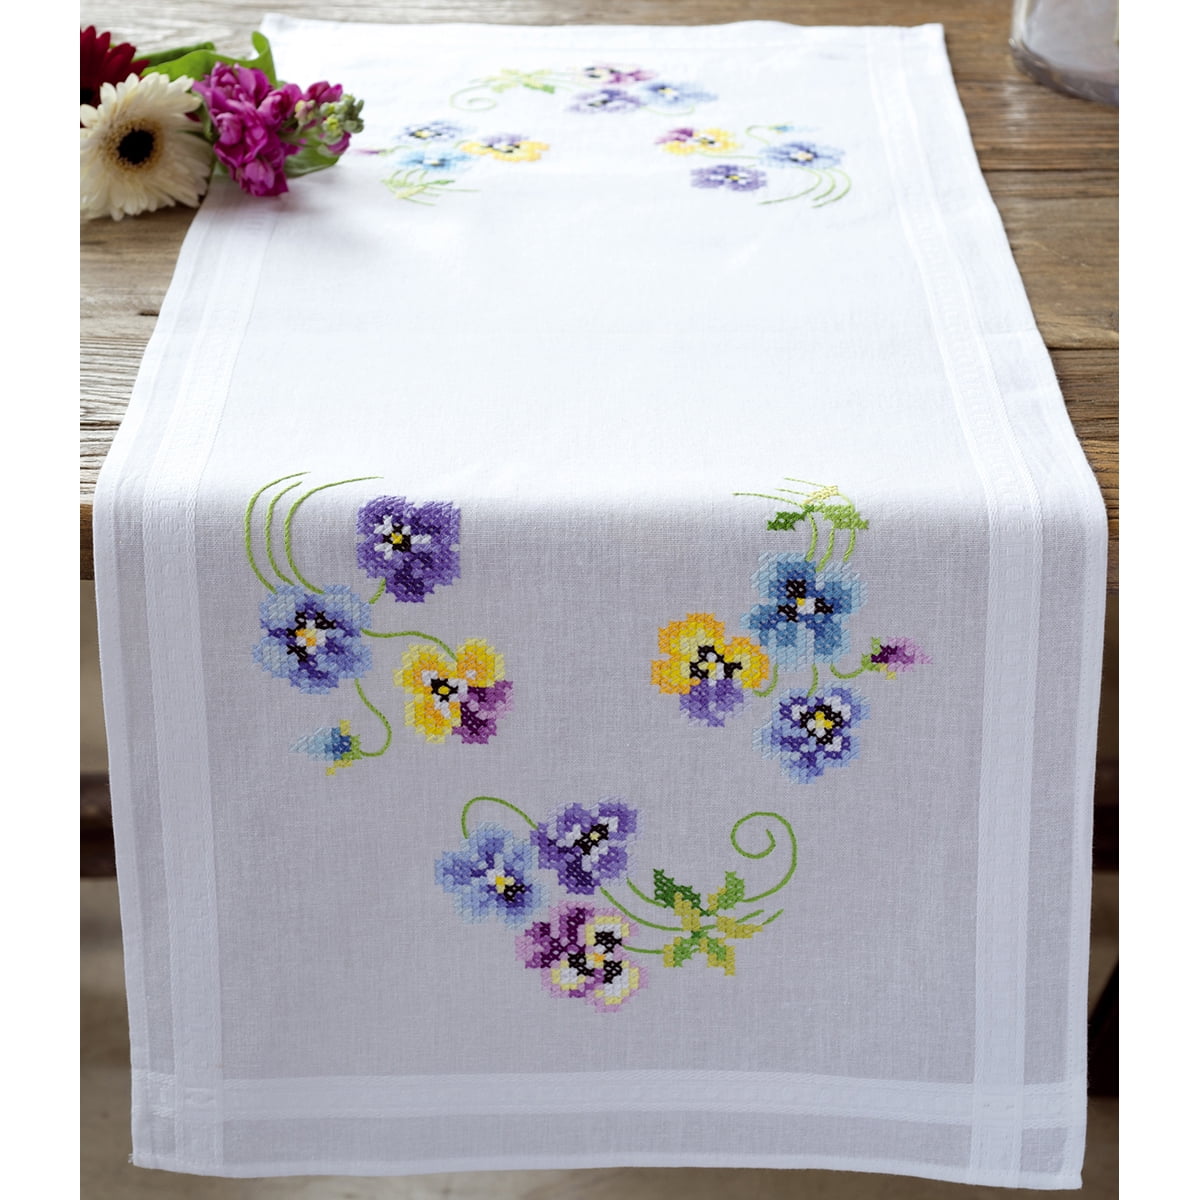 Black Embroidered Louis Vuitton Table Runner